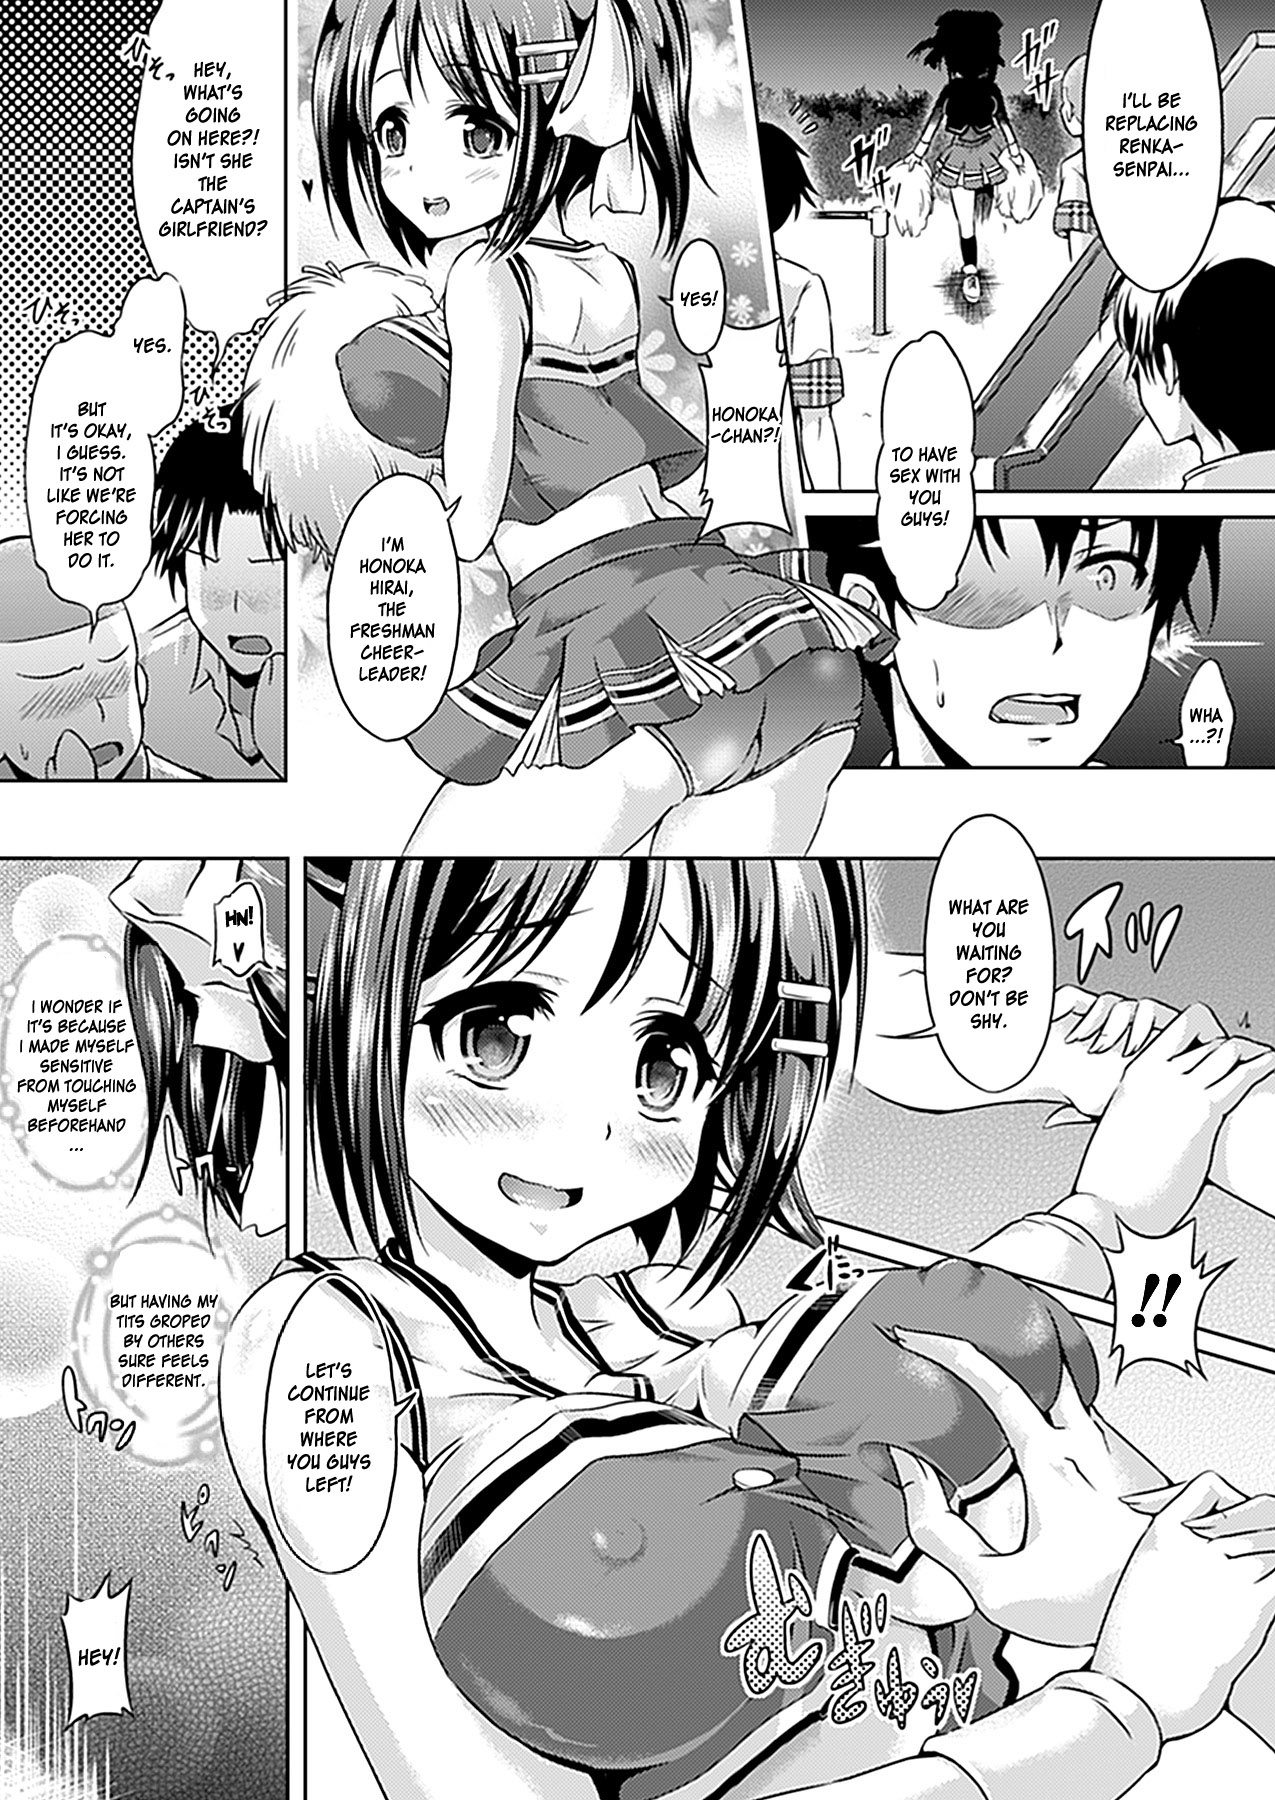 [Taniguchi-san] Transform into Anything, Anywhere Ch. 1-2 [Eng] {doujin-moe.us} page 26 full